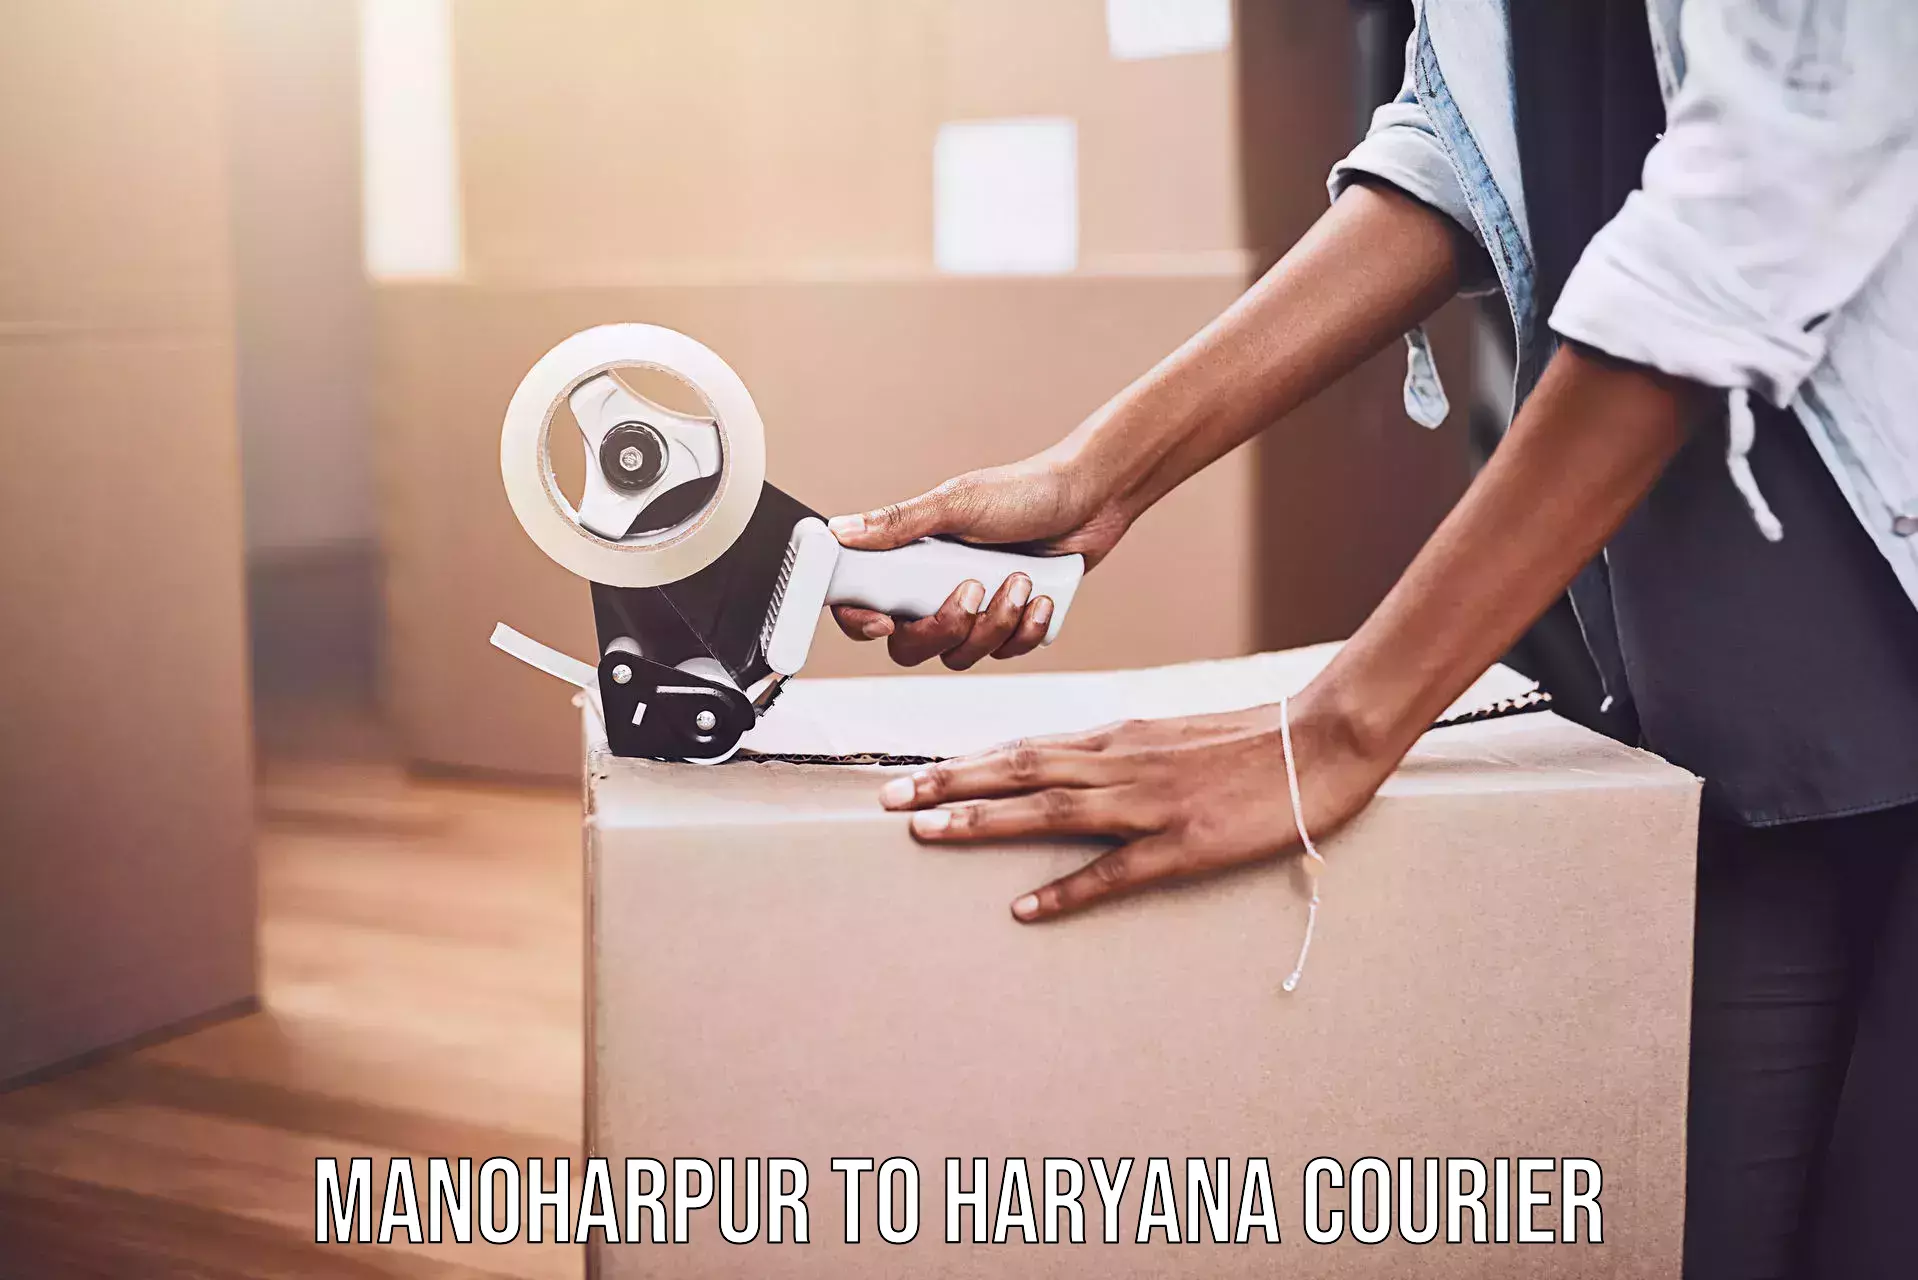 Fast delivery service Manoharpur to Chandi Rohtak